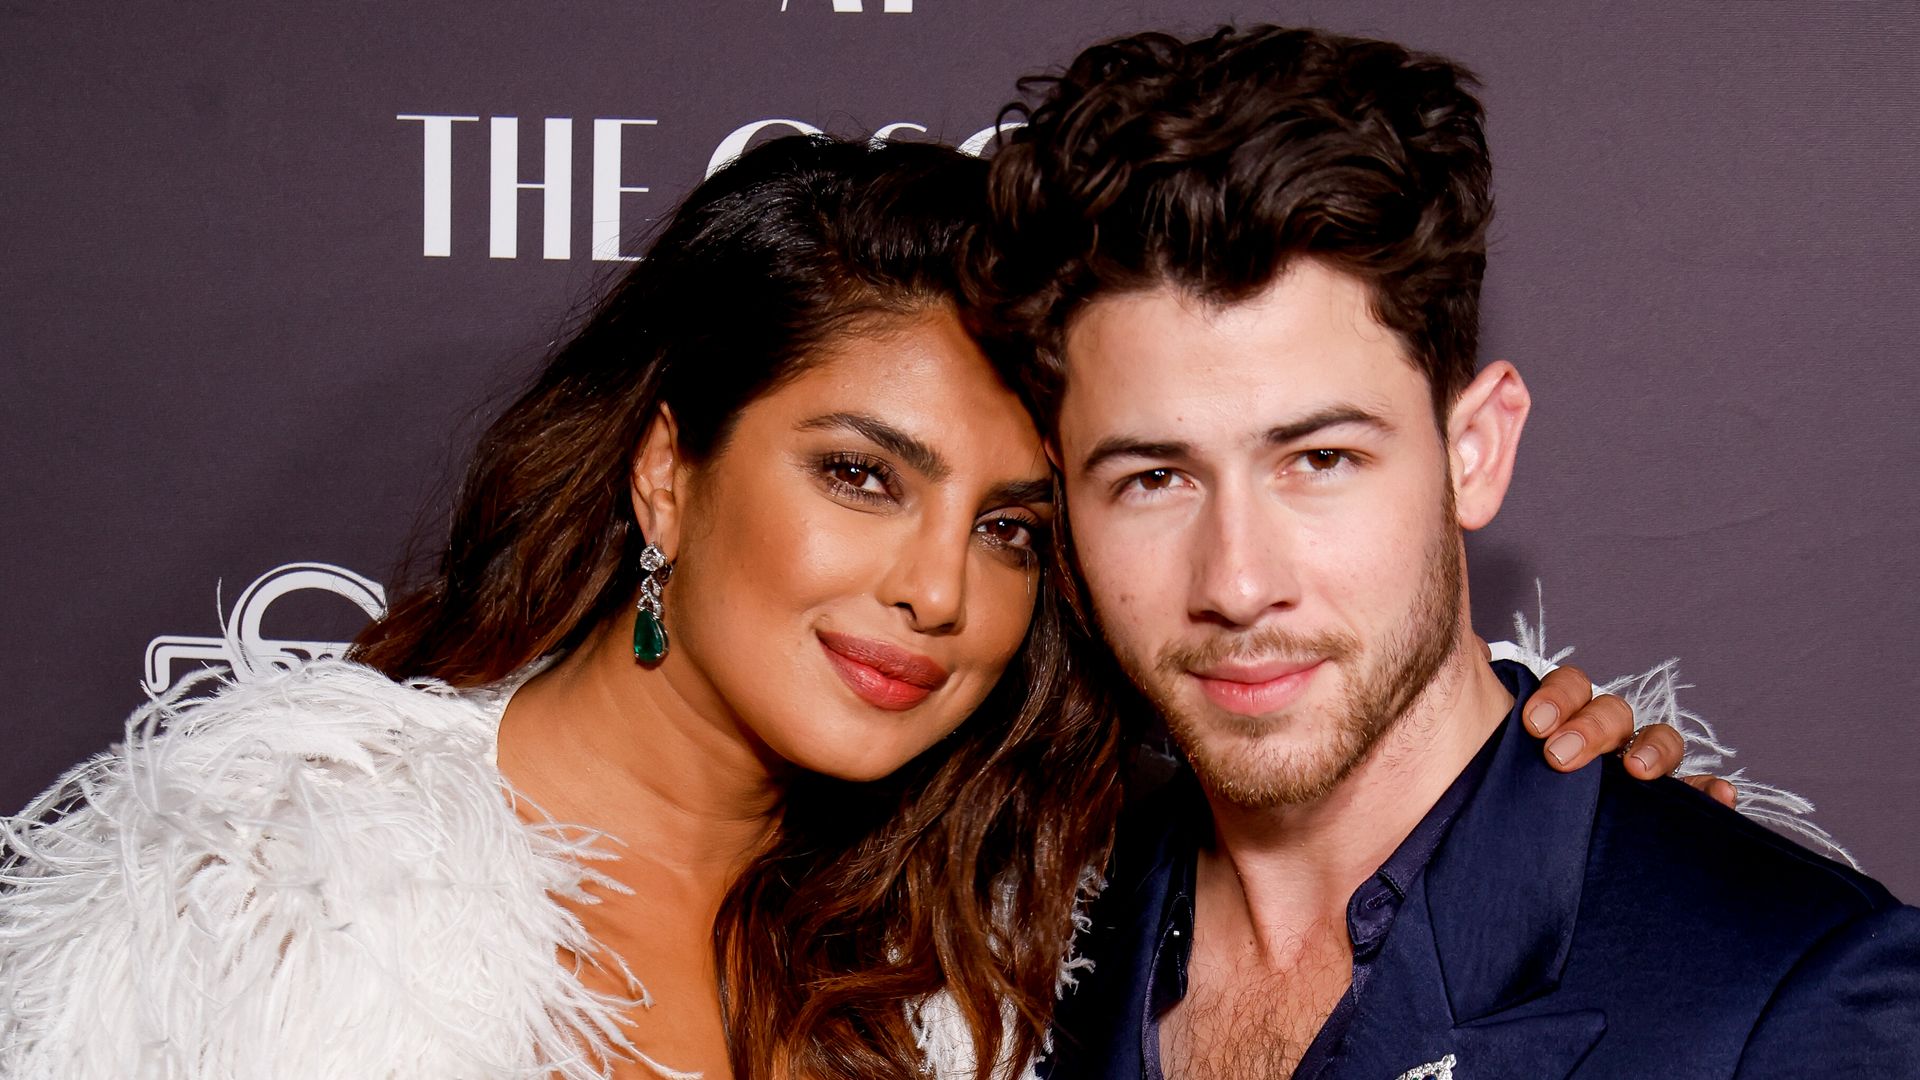 Priyanka Chopra Jonas and Nick Jonas at the South Asian Excellence at the Oscars held at the Paramount Studio Lot on March 9, 2023 in Los Angeles, California.